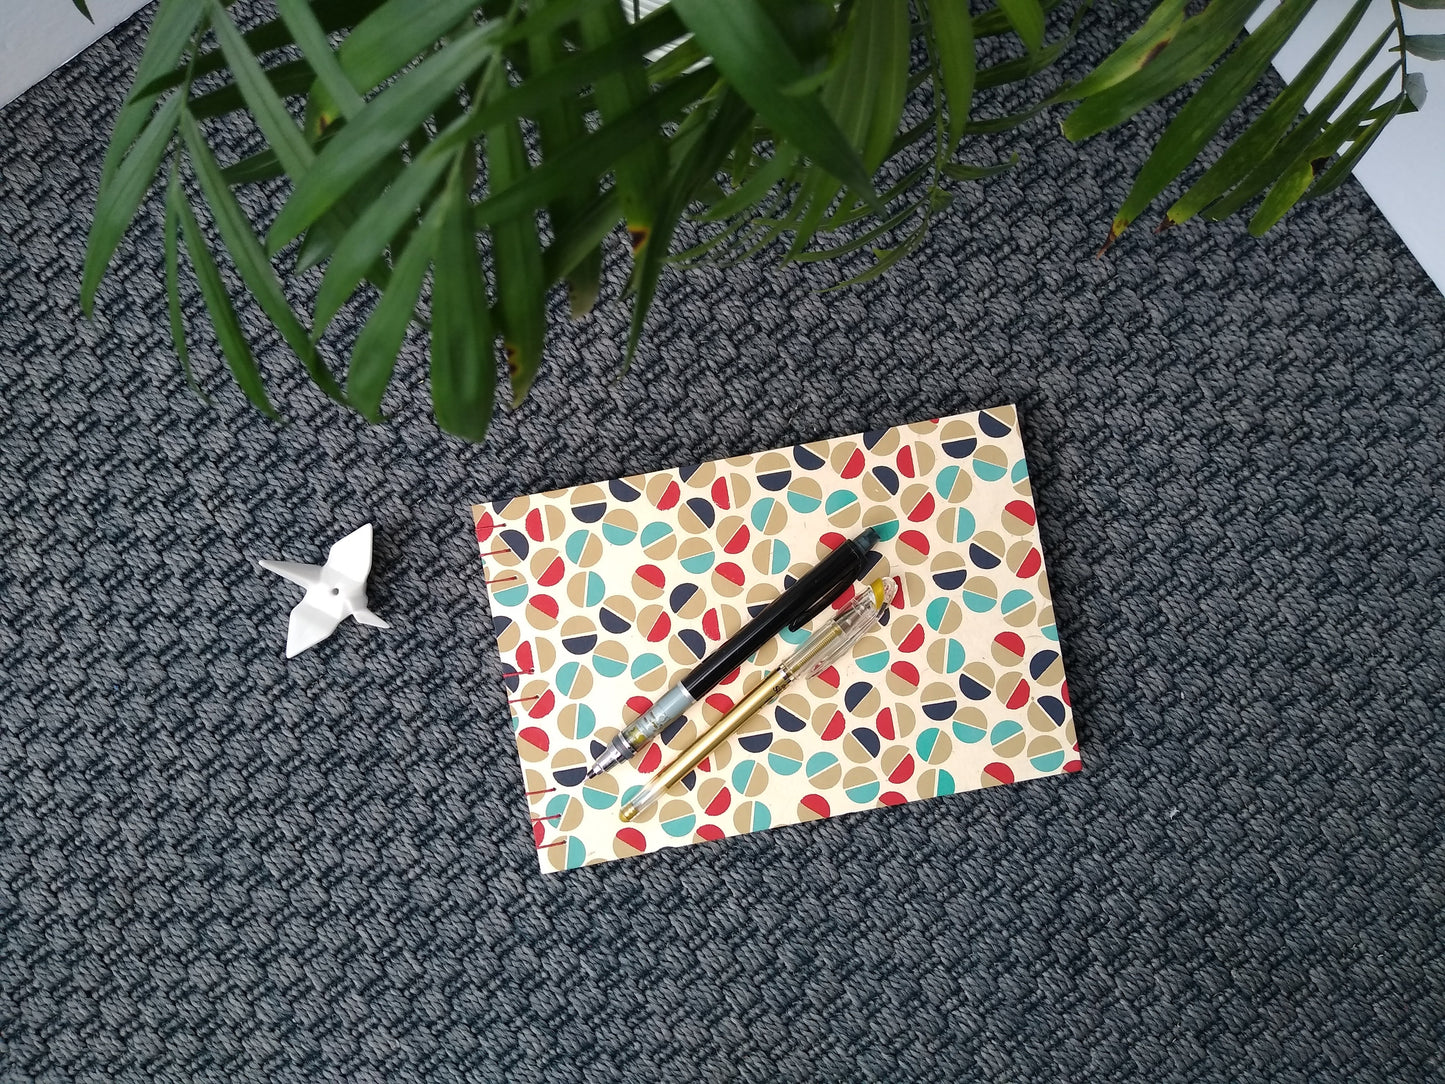 A handmade journal laying on a grey carpet beside a potted plant, a ceramic crane, a gold pen, and a black mechanical pencil. The cover of the journal is cream with half circles in gold, teal, dark blue, and red all over it. The half circles are placed next to each other to look like the head of a flat-head screw.